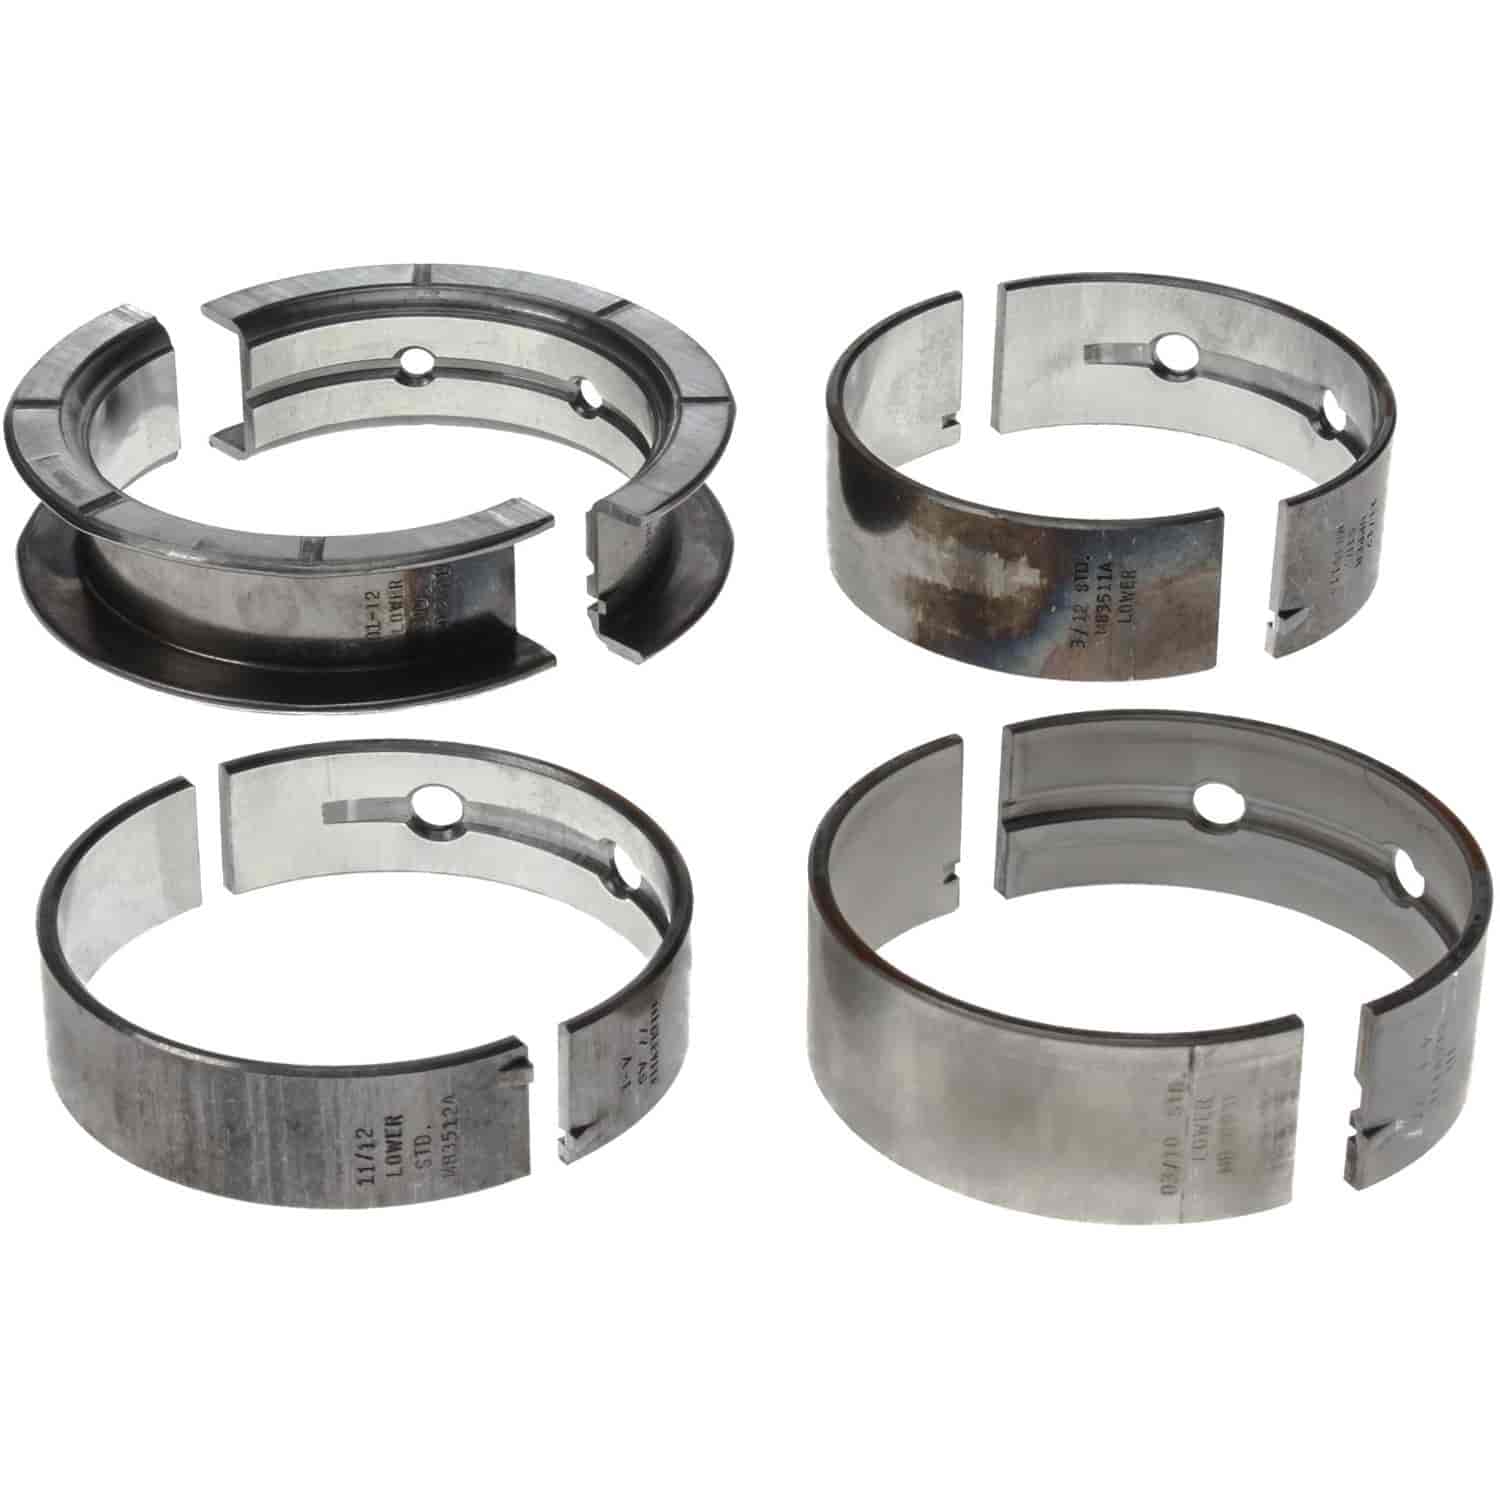 Main Bearing Set Chevy 2006-2007 V6 3.5L with -.75mm Undersize